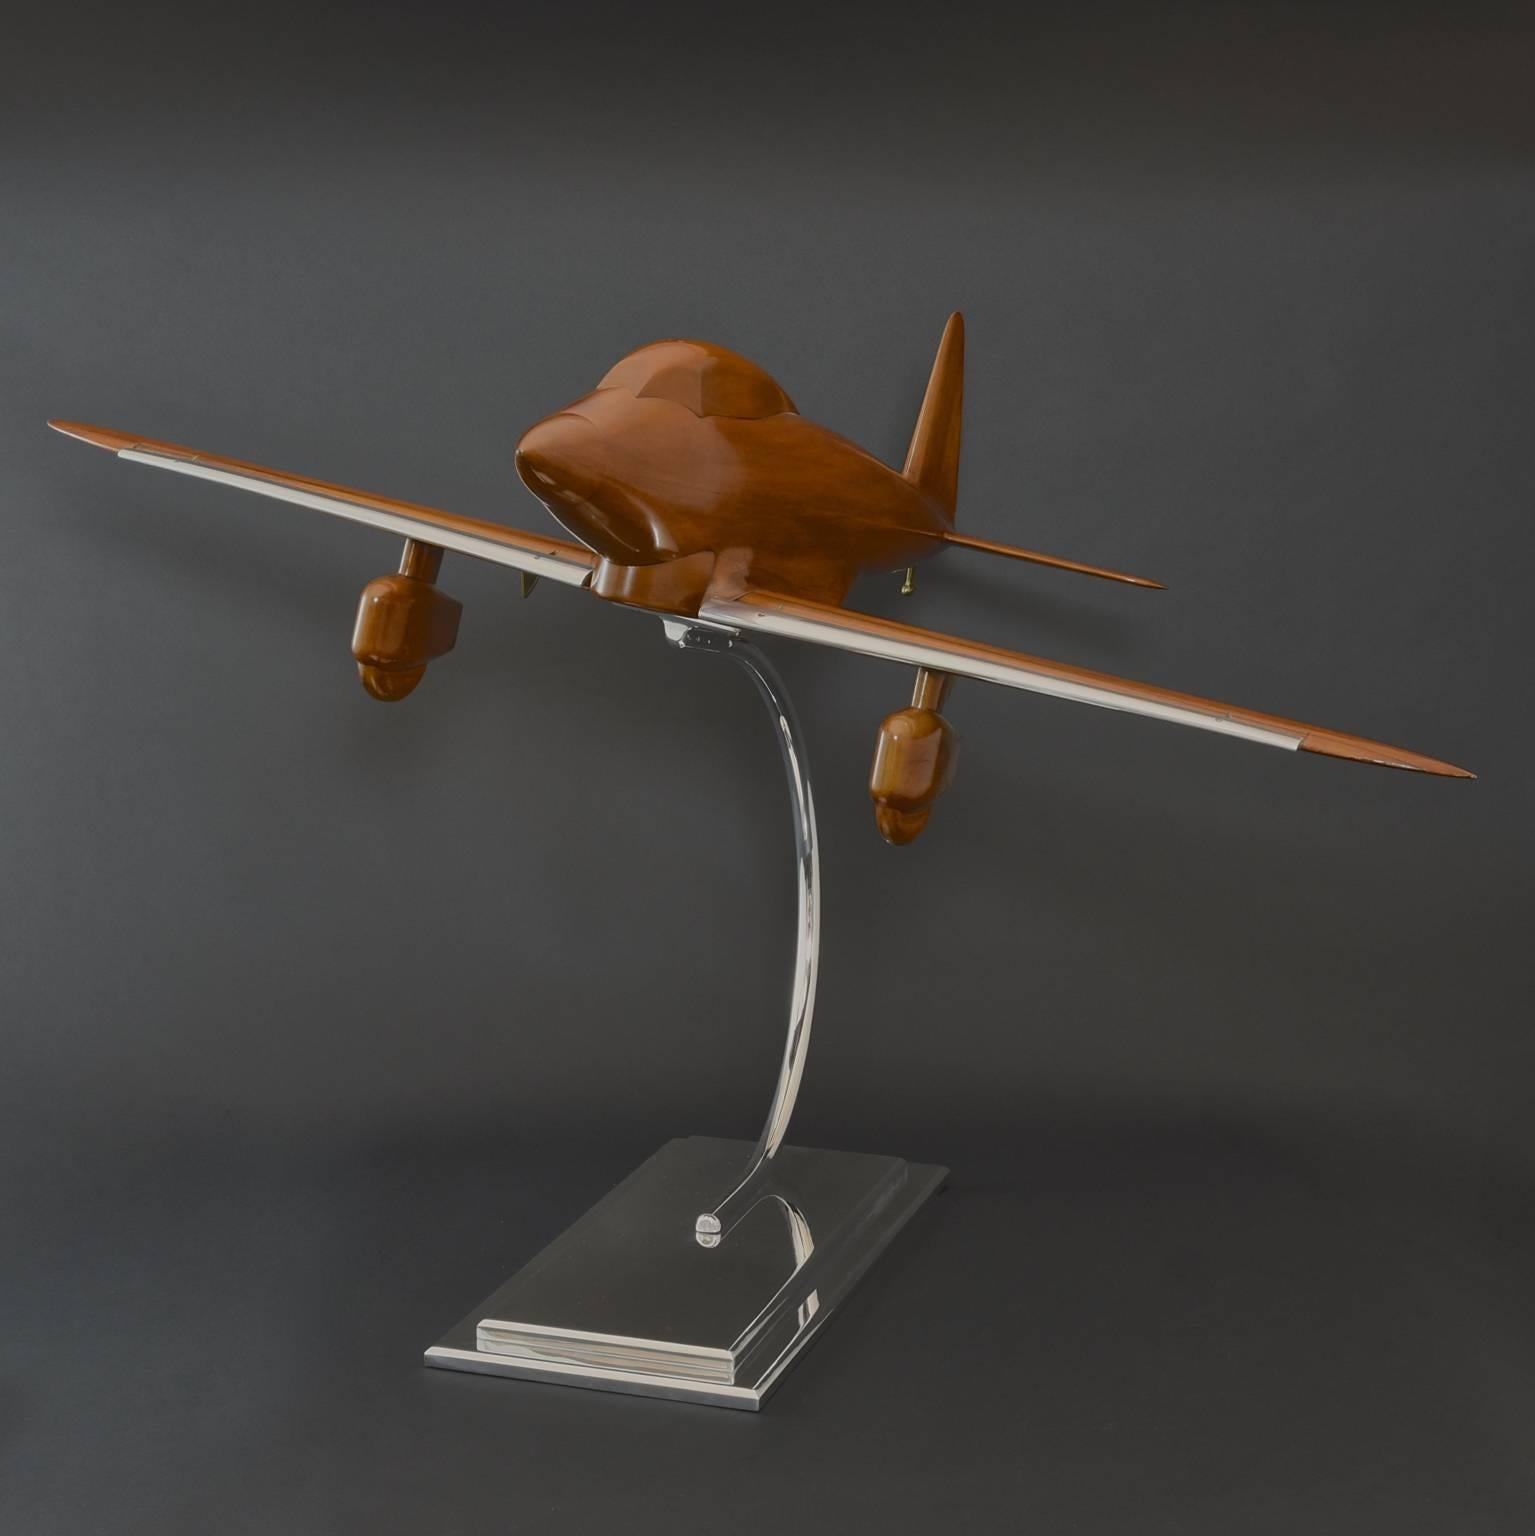 A stylish, large-scale Italian walnut Art Deco influenced wind tunnel aircraft model with metal details and moving wing and tail flaps, circa 1935. With a wingspan of 110cm and standing 64 cm tall, this model has great impact. Newly mounted on a two